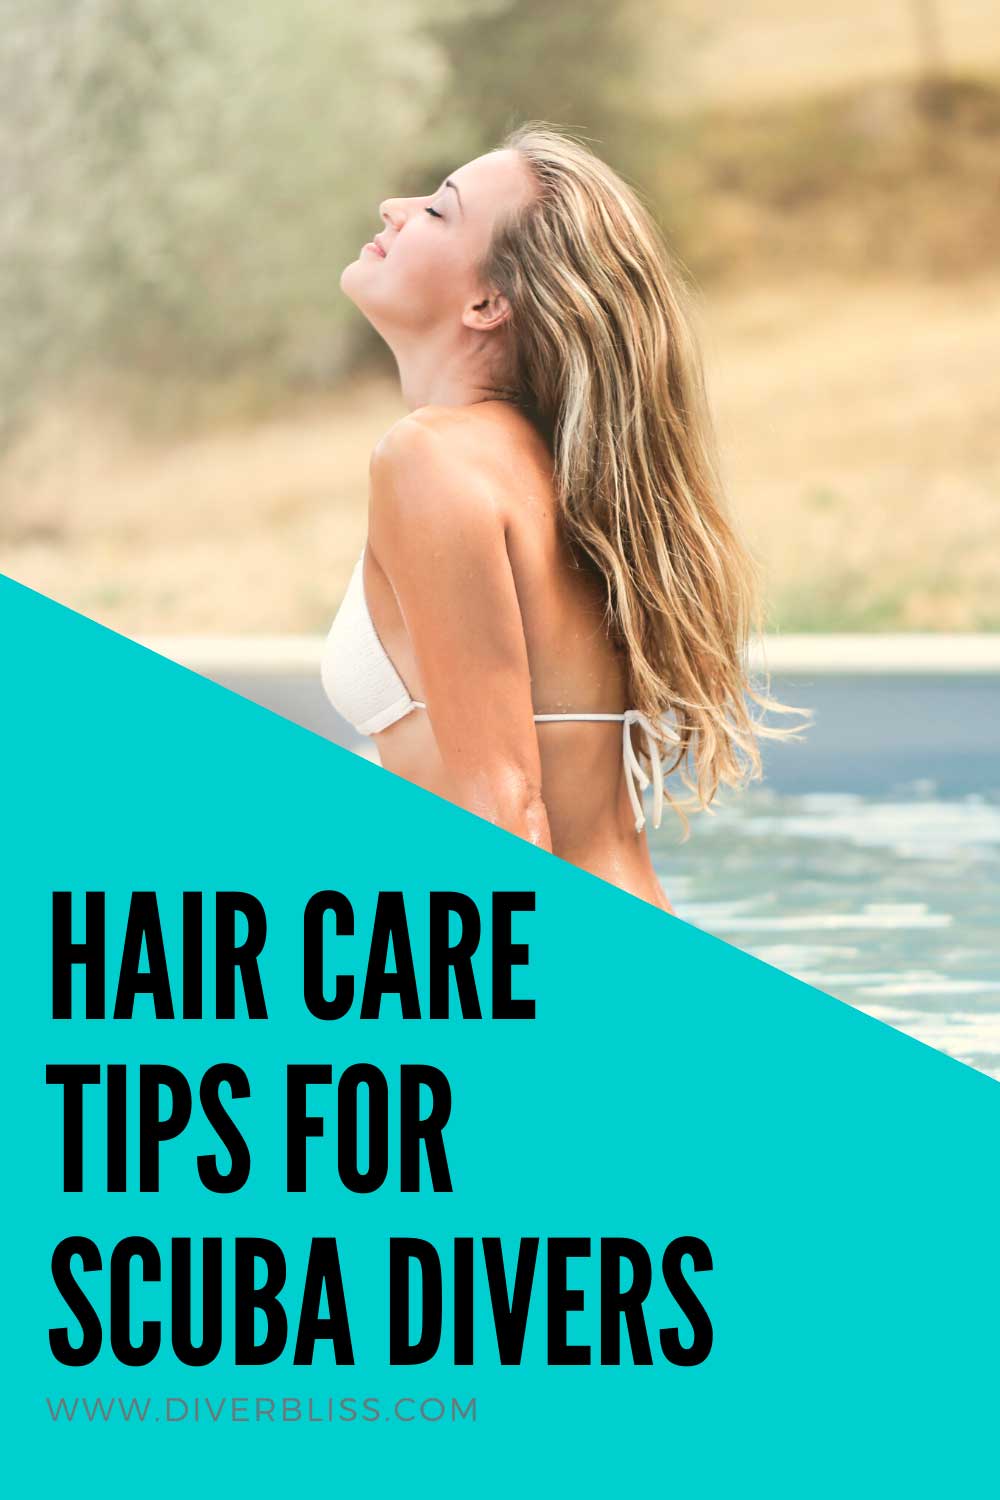 Hair Care Tips for Scuba Divers